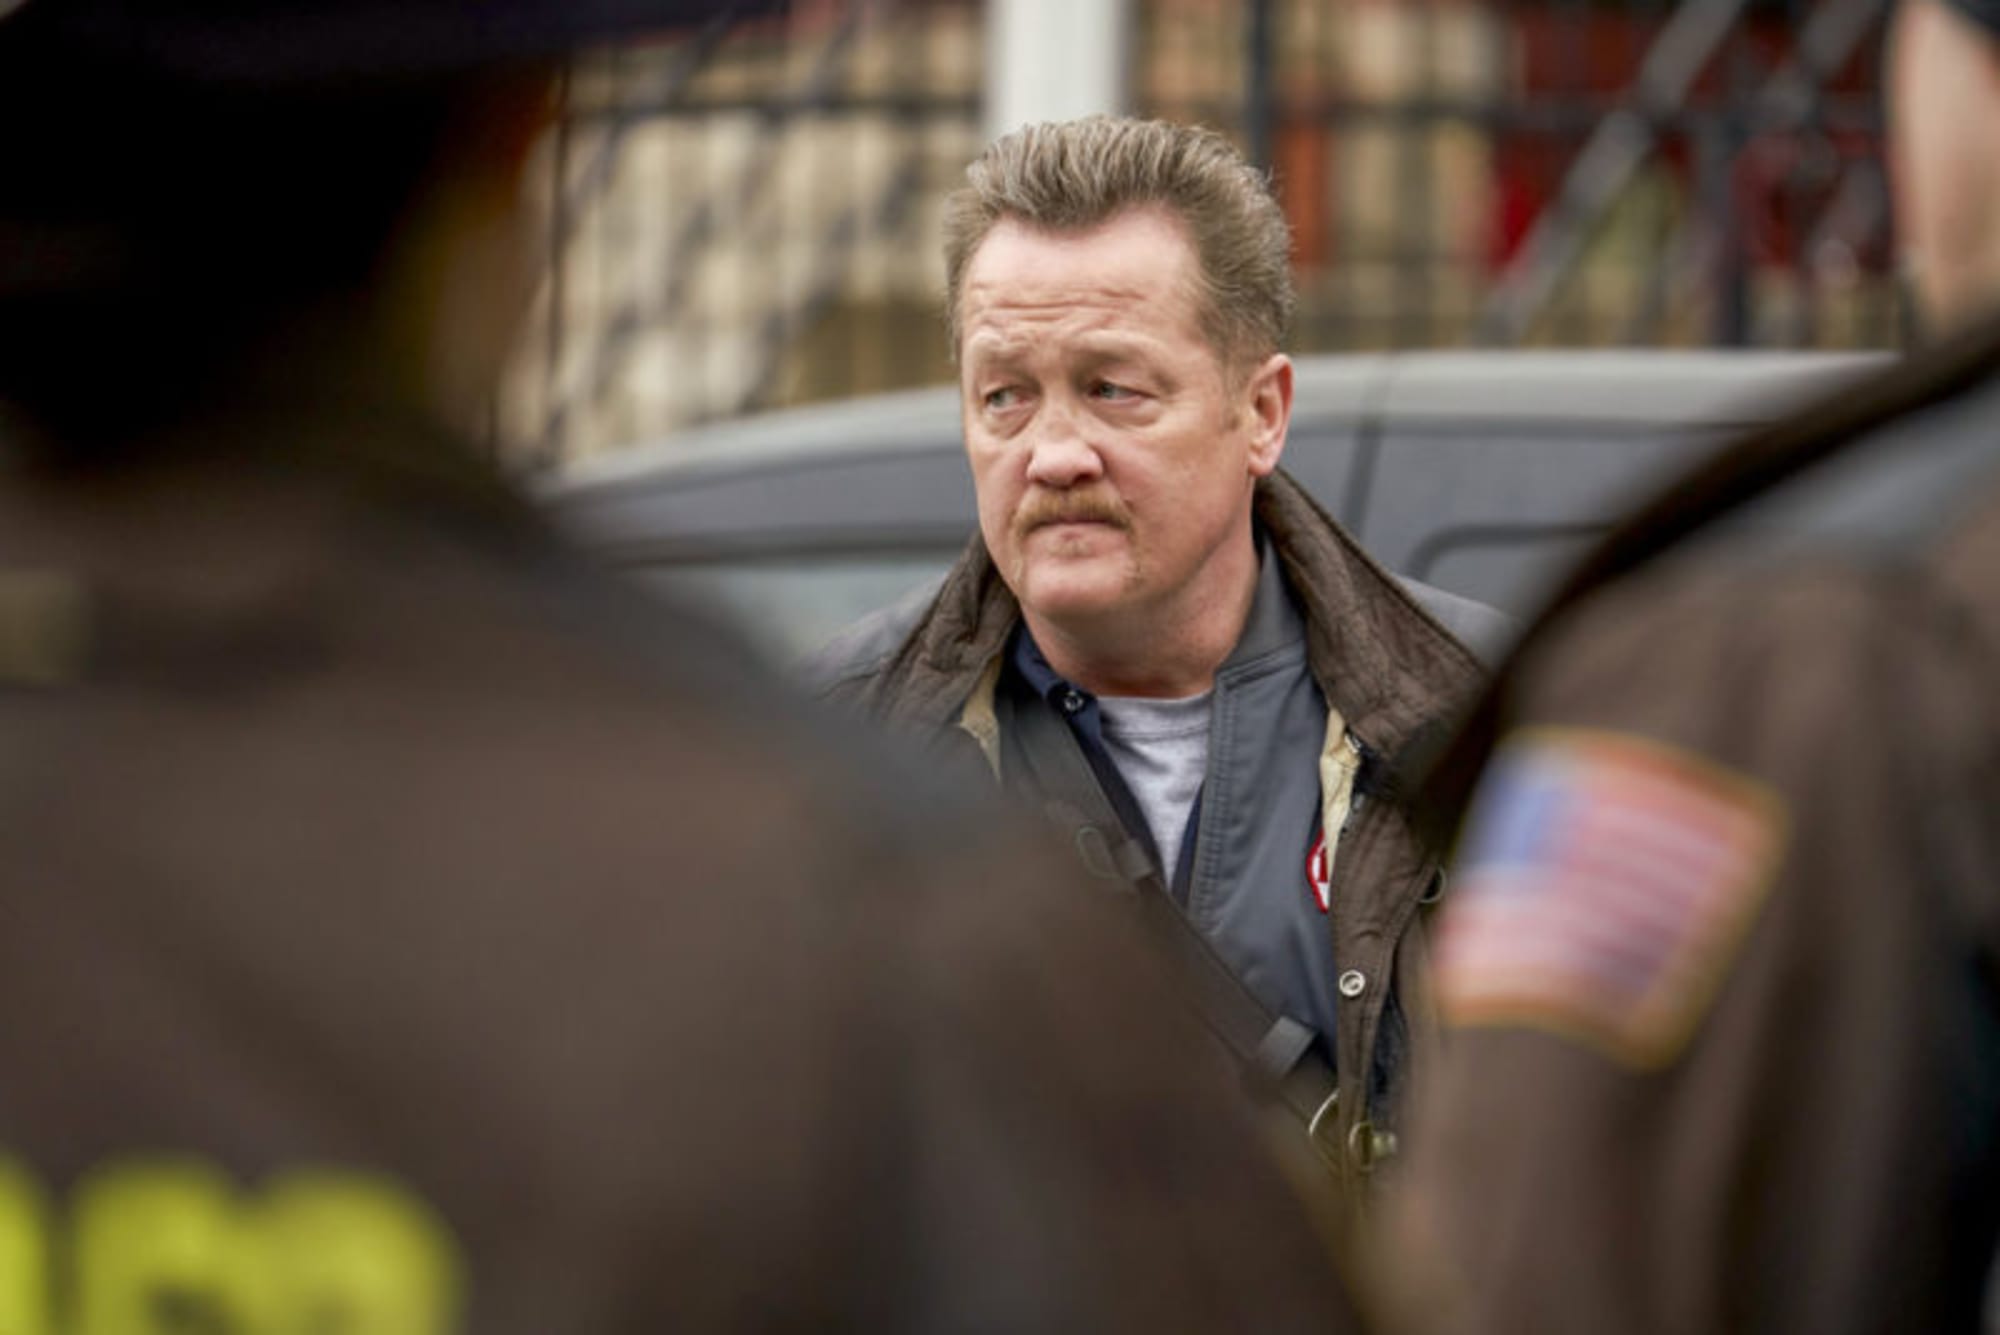 Chicago Fire season 8 character preview: Randall "Mouch" McHolland